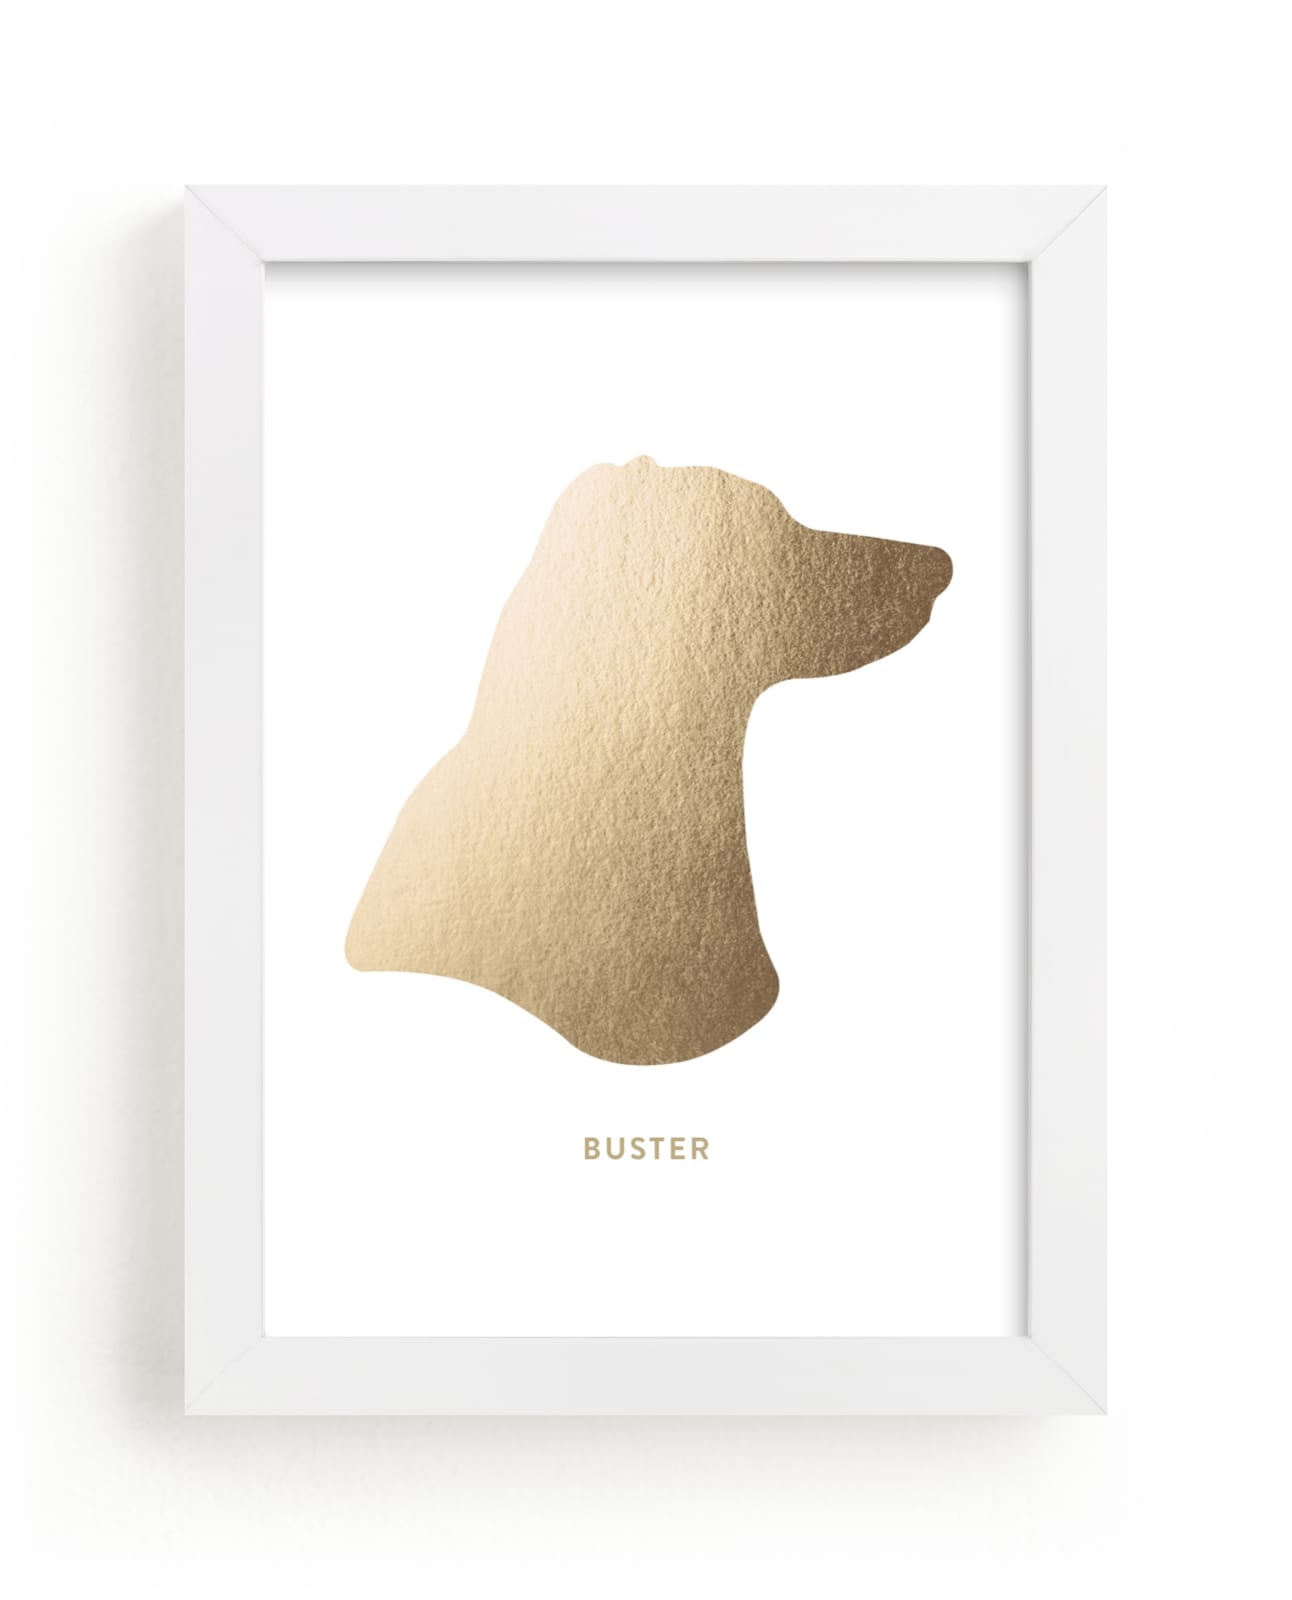 This is a gold silhouette art by Minted called Custom Pet Silhouette Foil Art.